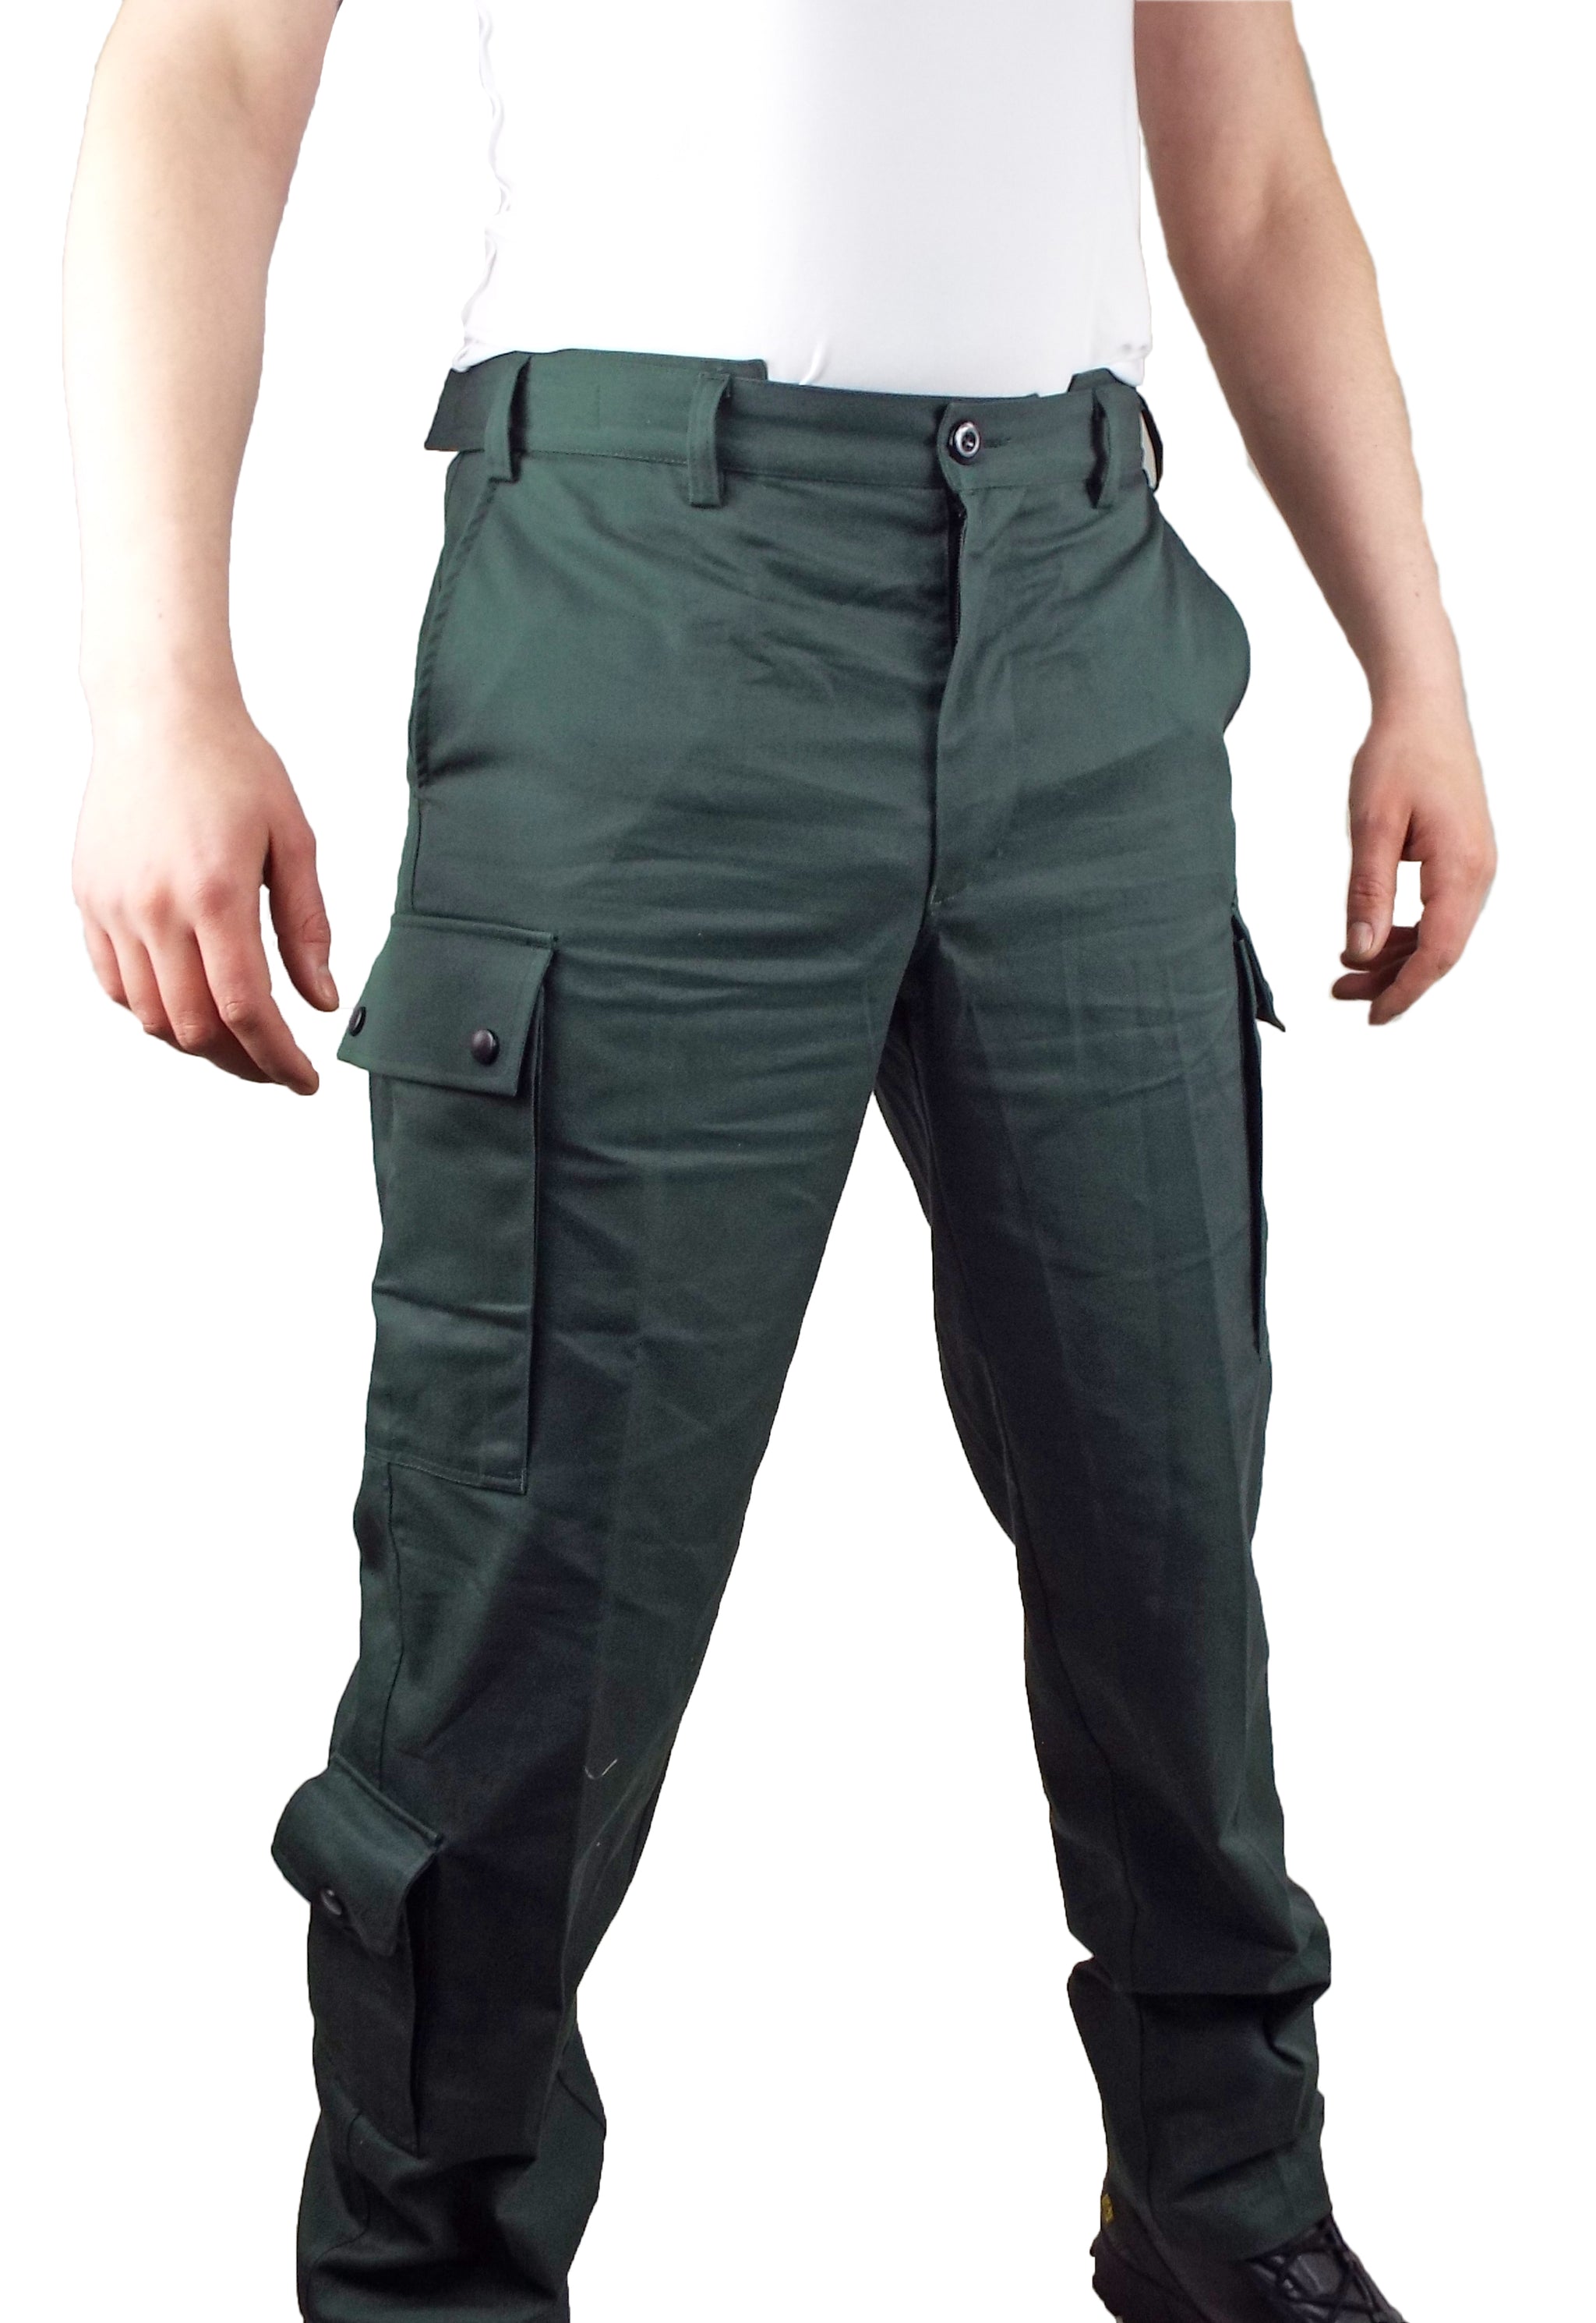 Lion Deluxe 6-Pocket Trousers - 6.5 oz Nomex - Navy — SeaWestern